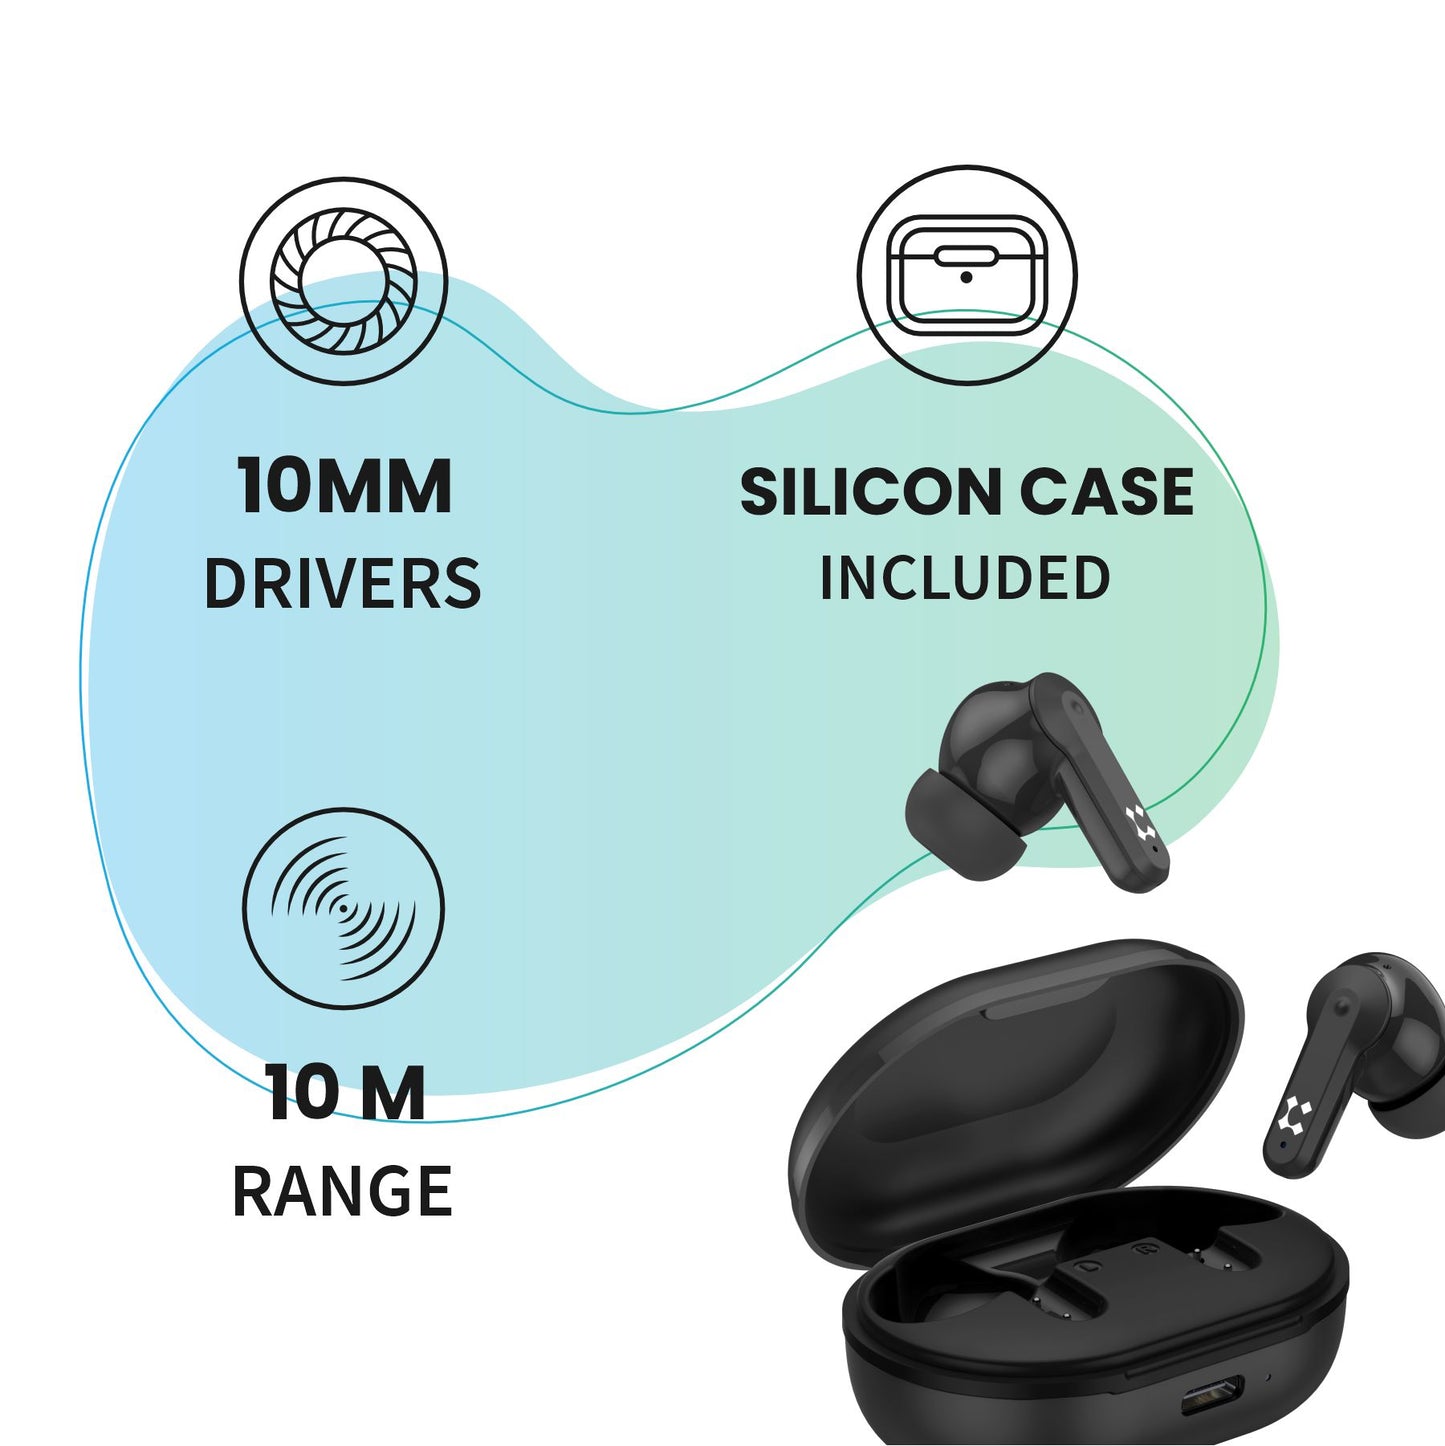 LYNE CoolPods 16 24 Hours Music Time True Wireless Earbuds with Touch Control and Quick Auto Pairing Feature